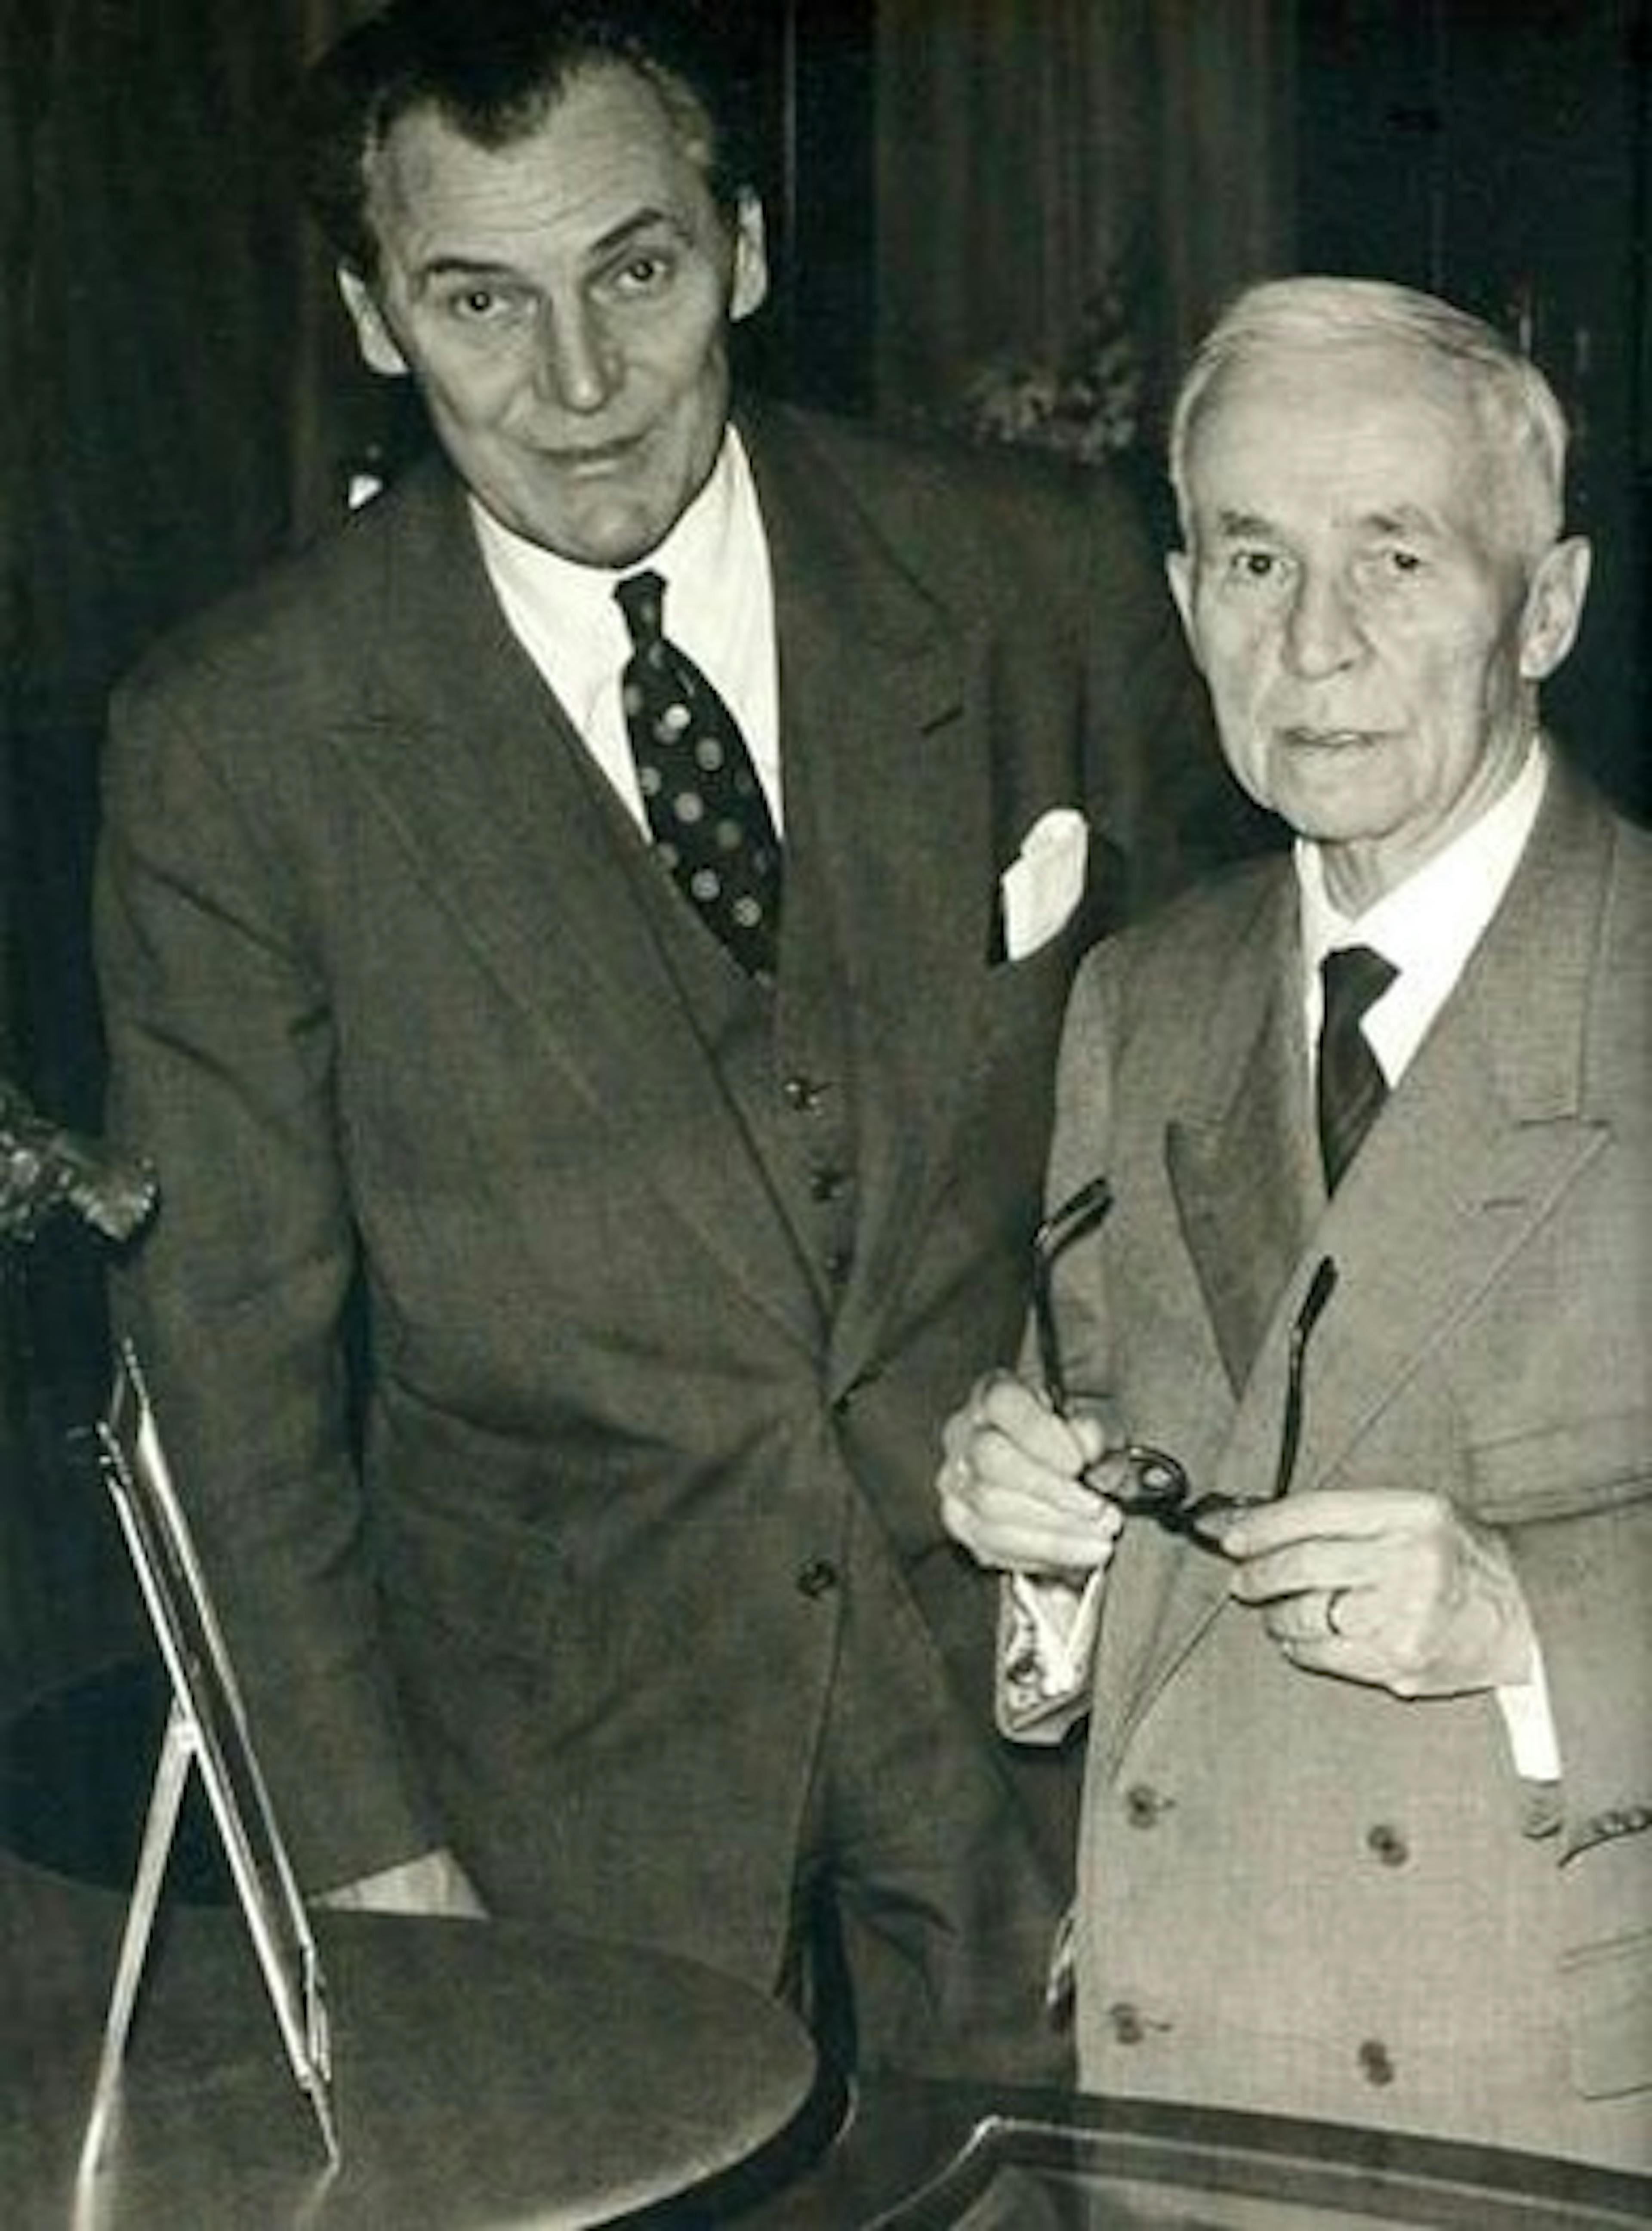 Henri Stern (left), was the first Stern family member to manage Patek Philippe. He dramatically changed its manufacturing processes before the Second World War. Photo Credit. Patekphilippe.com